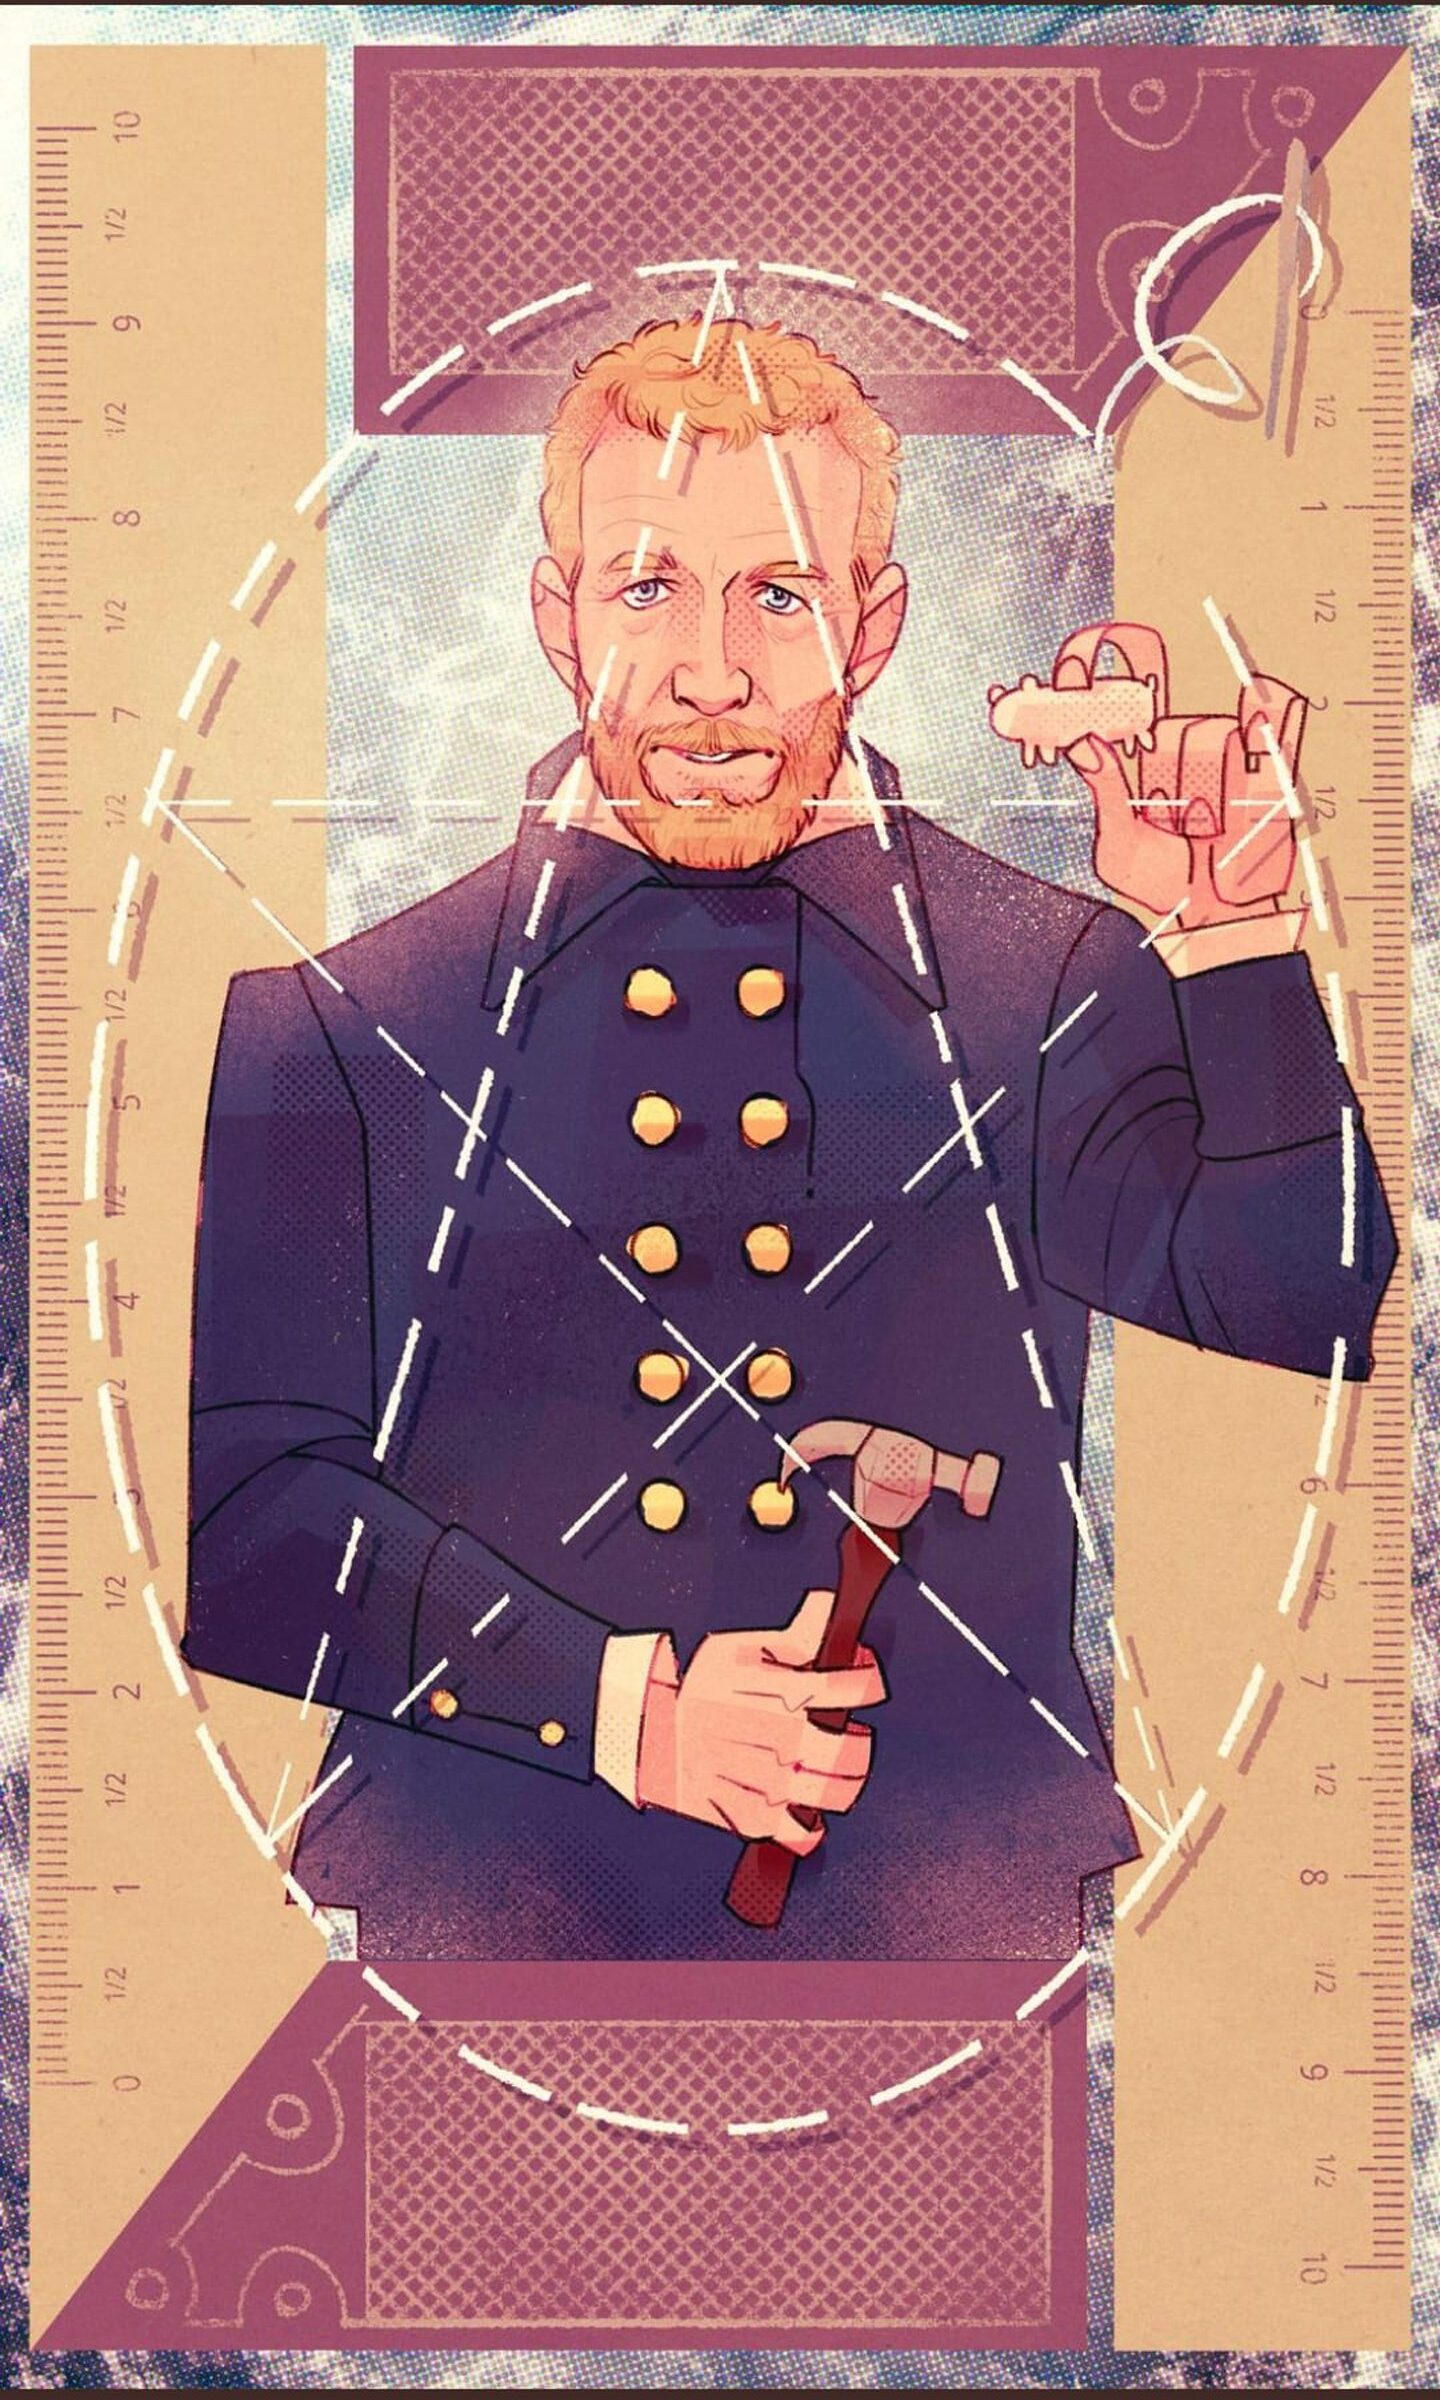 This wonderful tarot card of Gordon playing Weekes' is among his cherished fandom gifts. Image: Supplied.